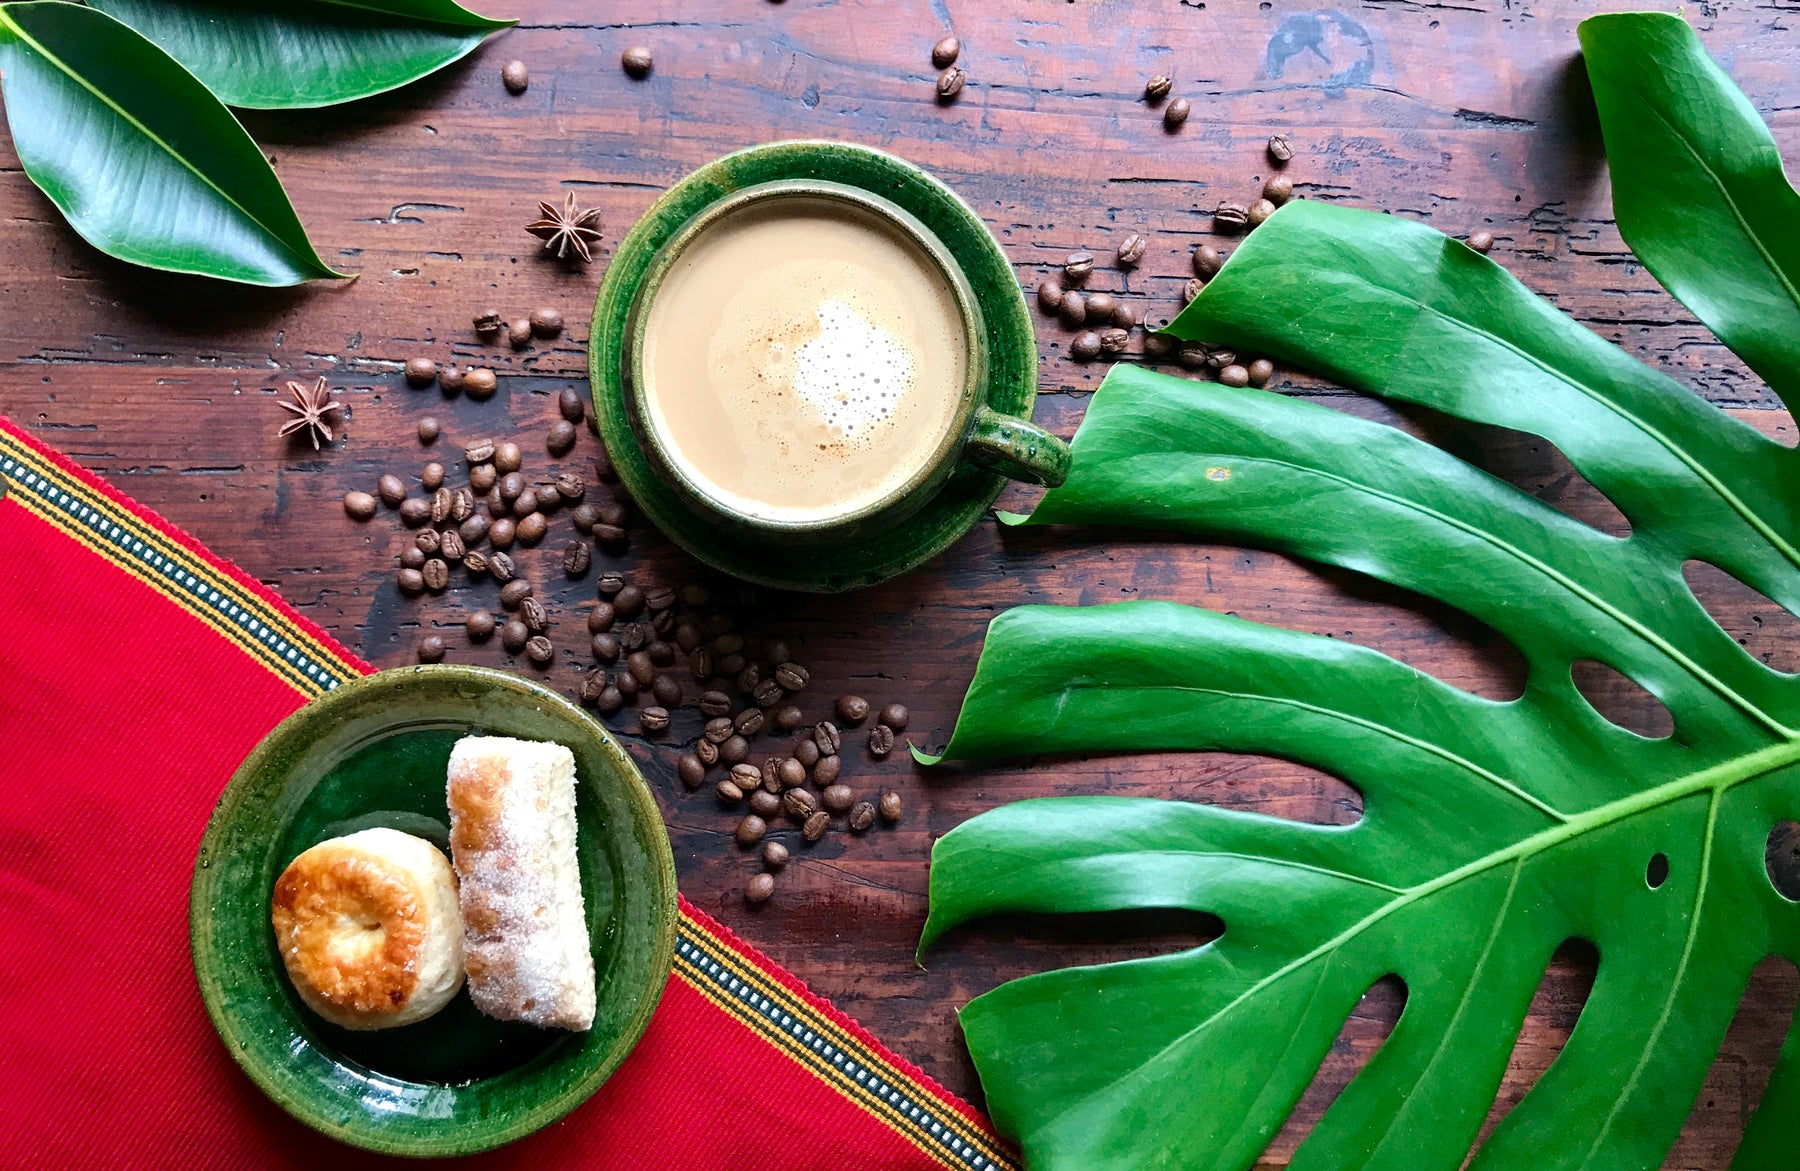 My Rainforest Heritage in a Cup of Coffee by Angelica Fuentes